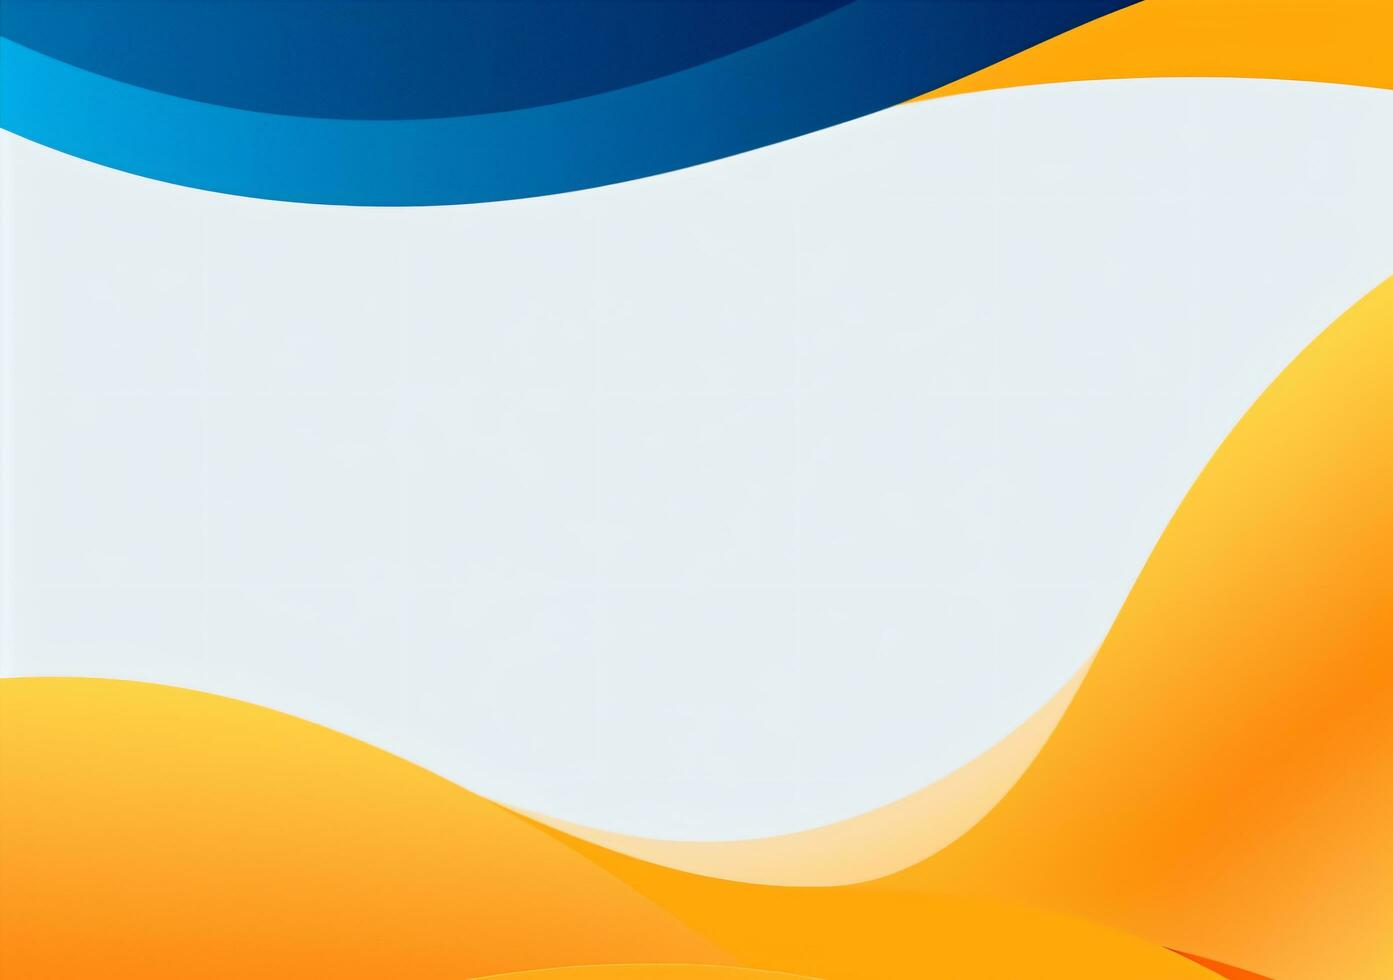 An Abstract Blue and Orange Presentation Background with Curved Lines Decorative Borders and Empty Space photo